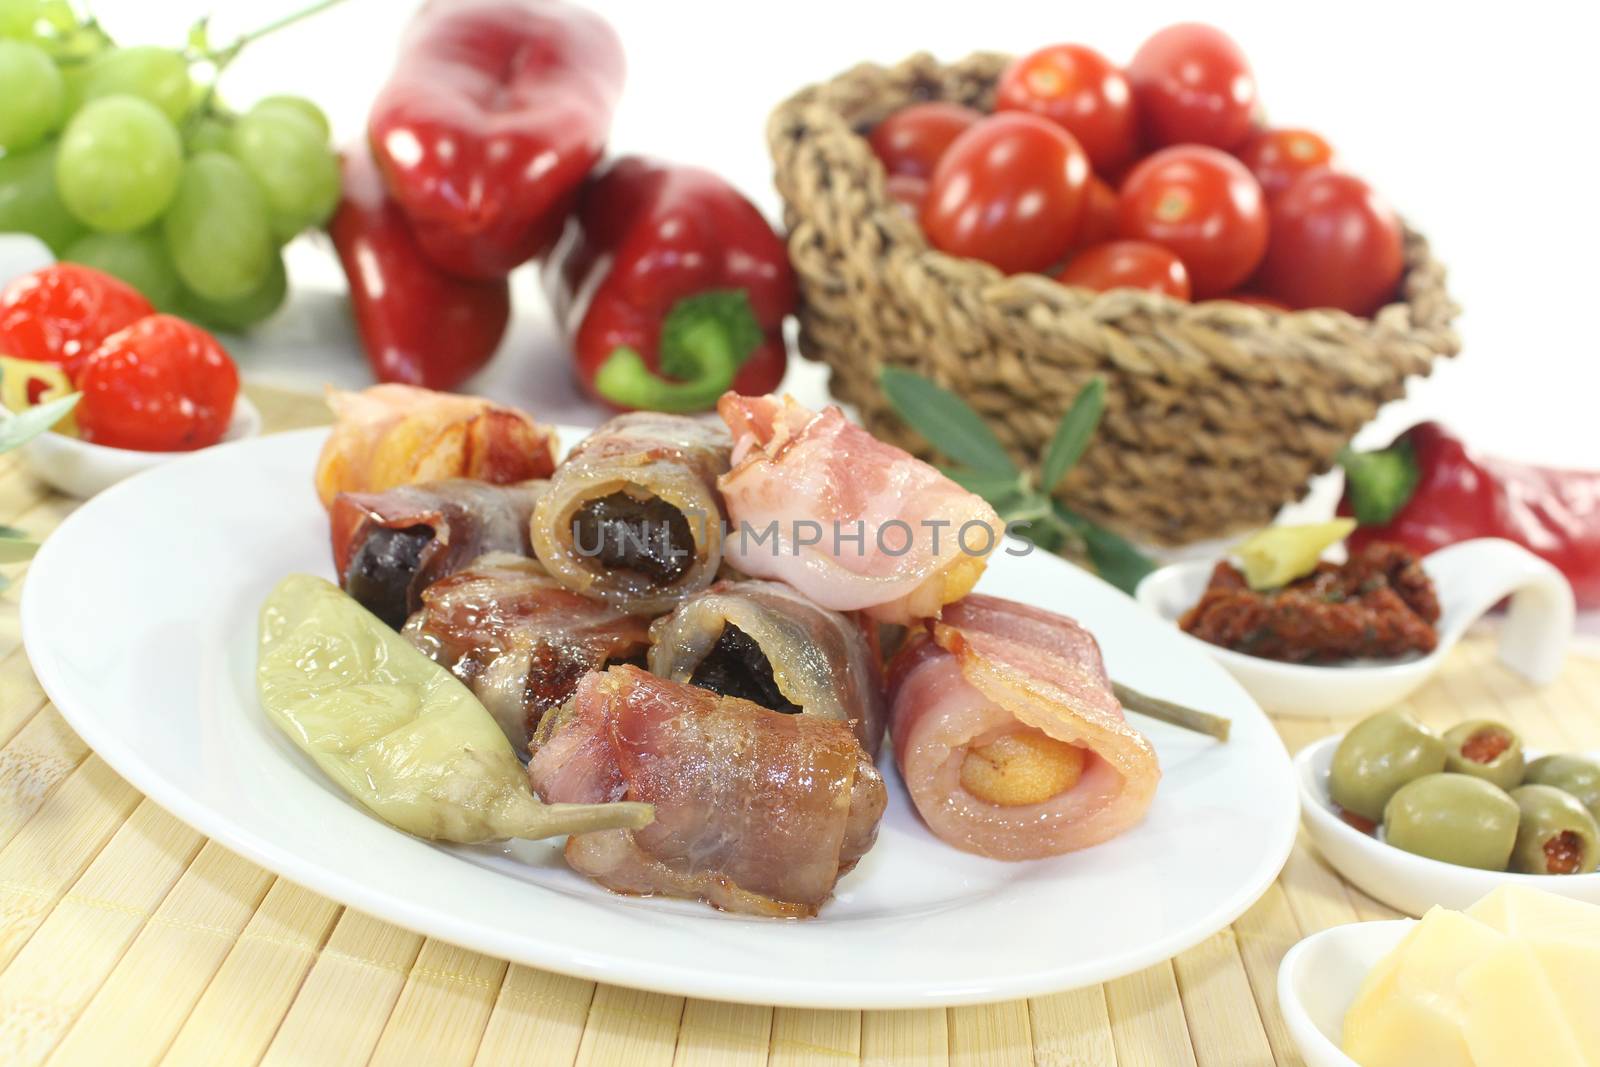 Tapas stuffed with fruits by discovery